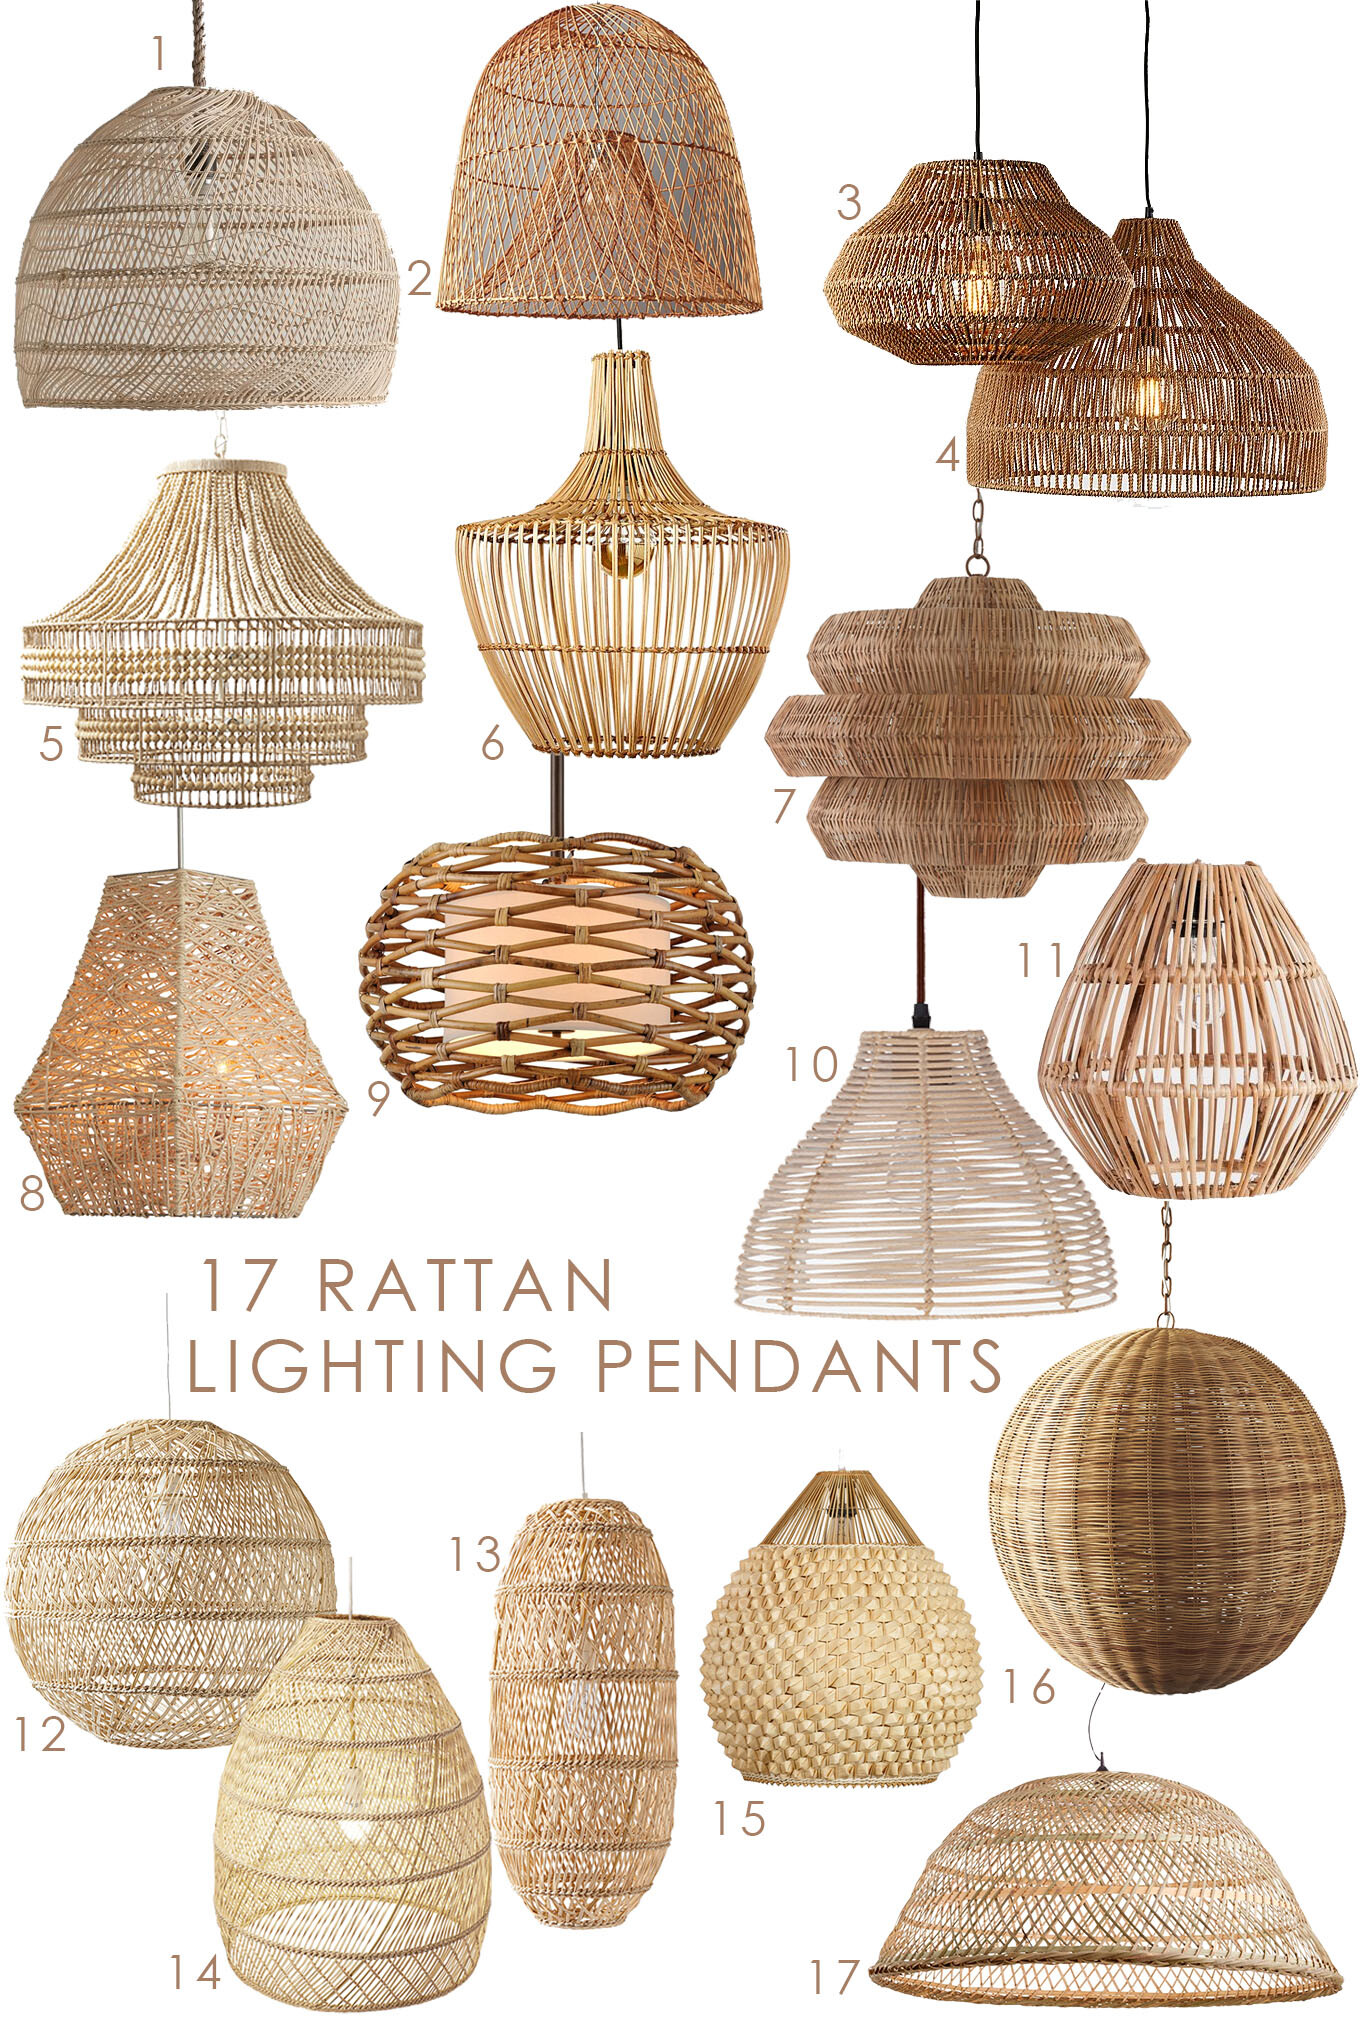 Want to give your decor a refresh? An easy way to do that is with one of these 17 rattan lighting pendants. It will brighten and modernize your space.